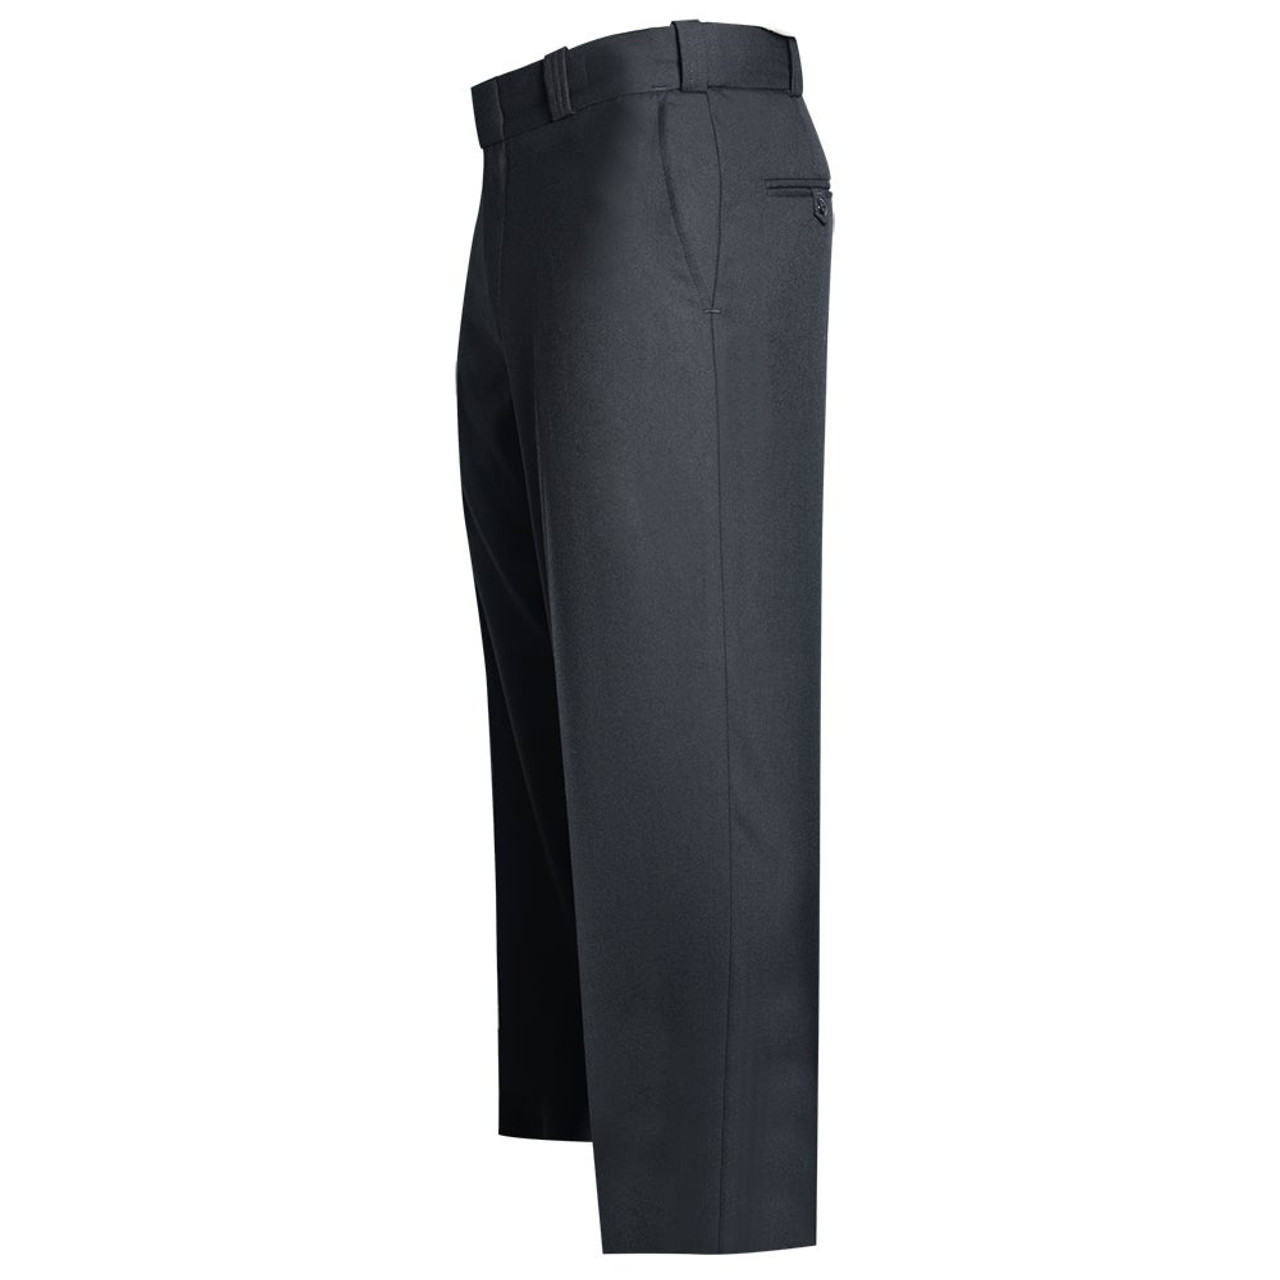 NEW Men's Small Hockey Under Armour 100% polyester pants - black |  SidelineSwap